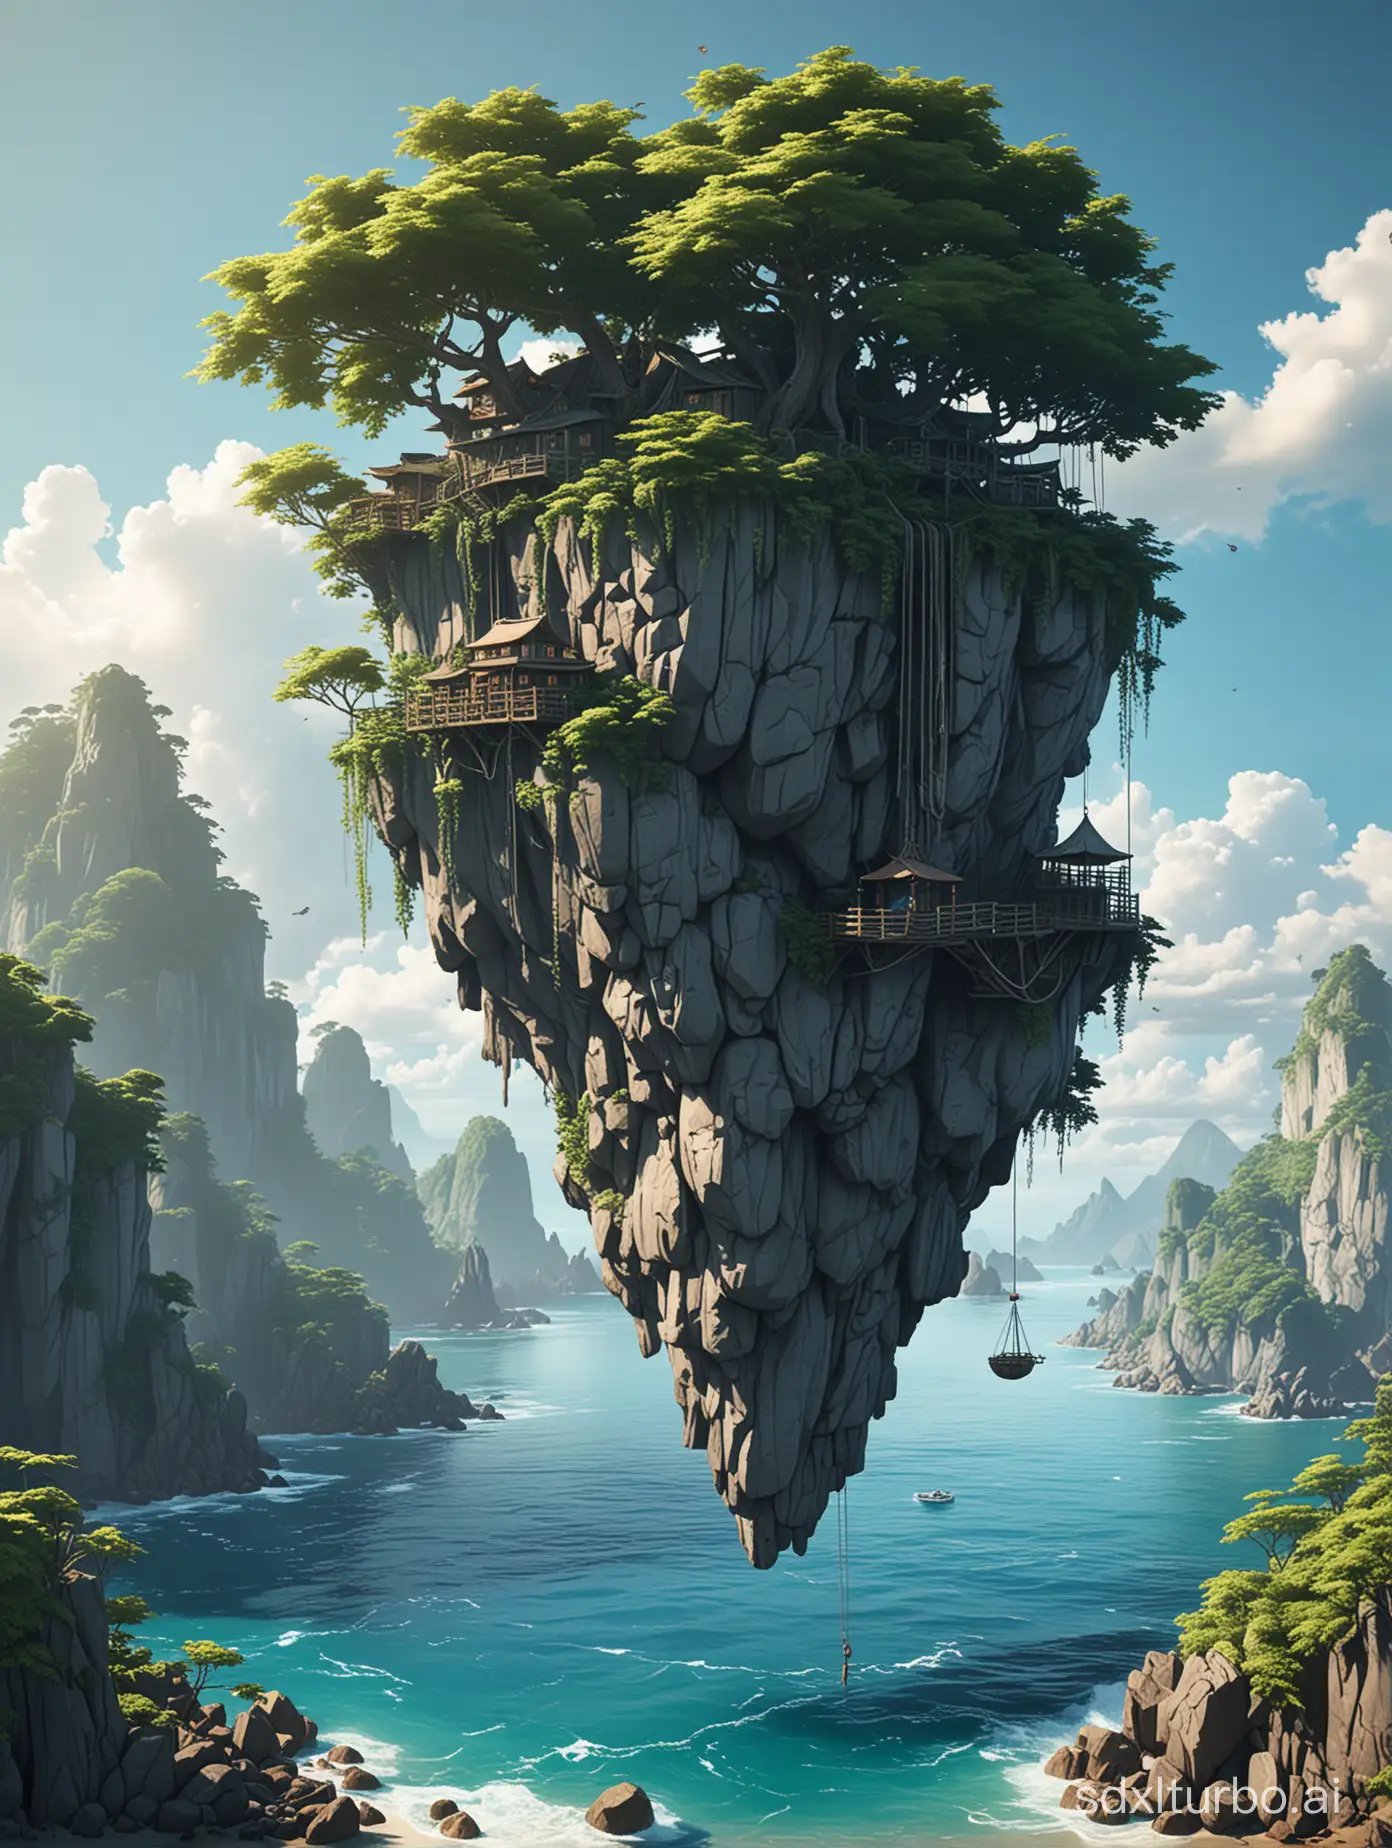 3d anime style of a hanging island